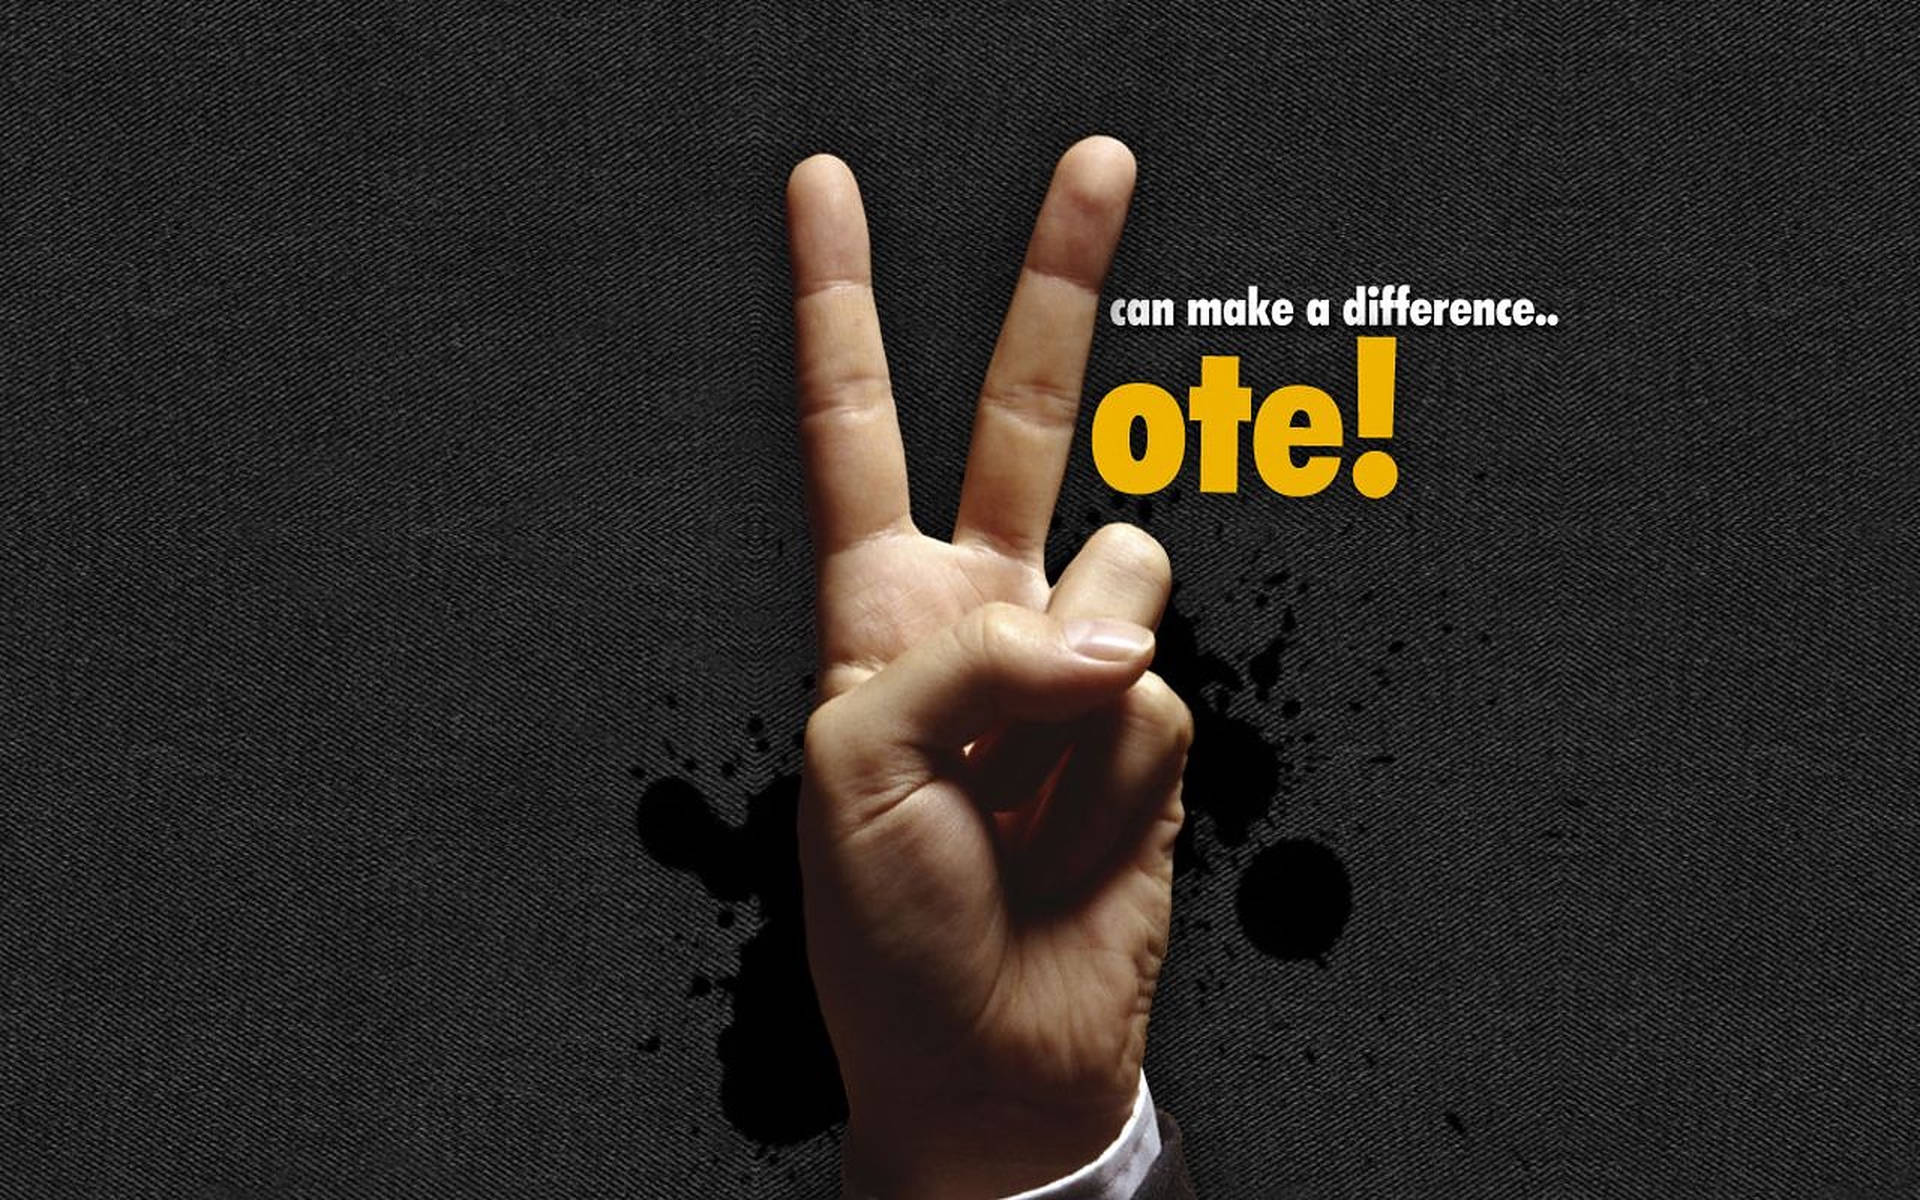 Hand Sign Election Poster Wallpaper